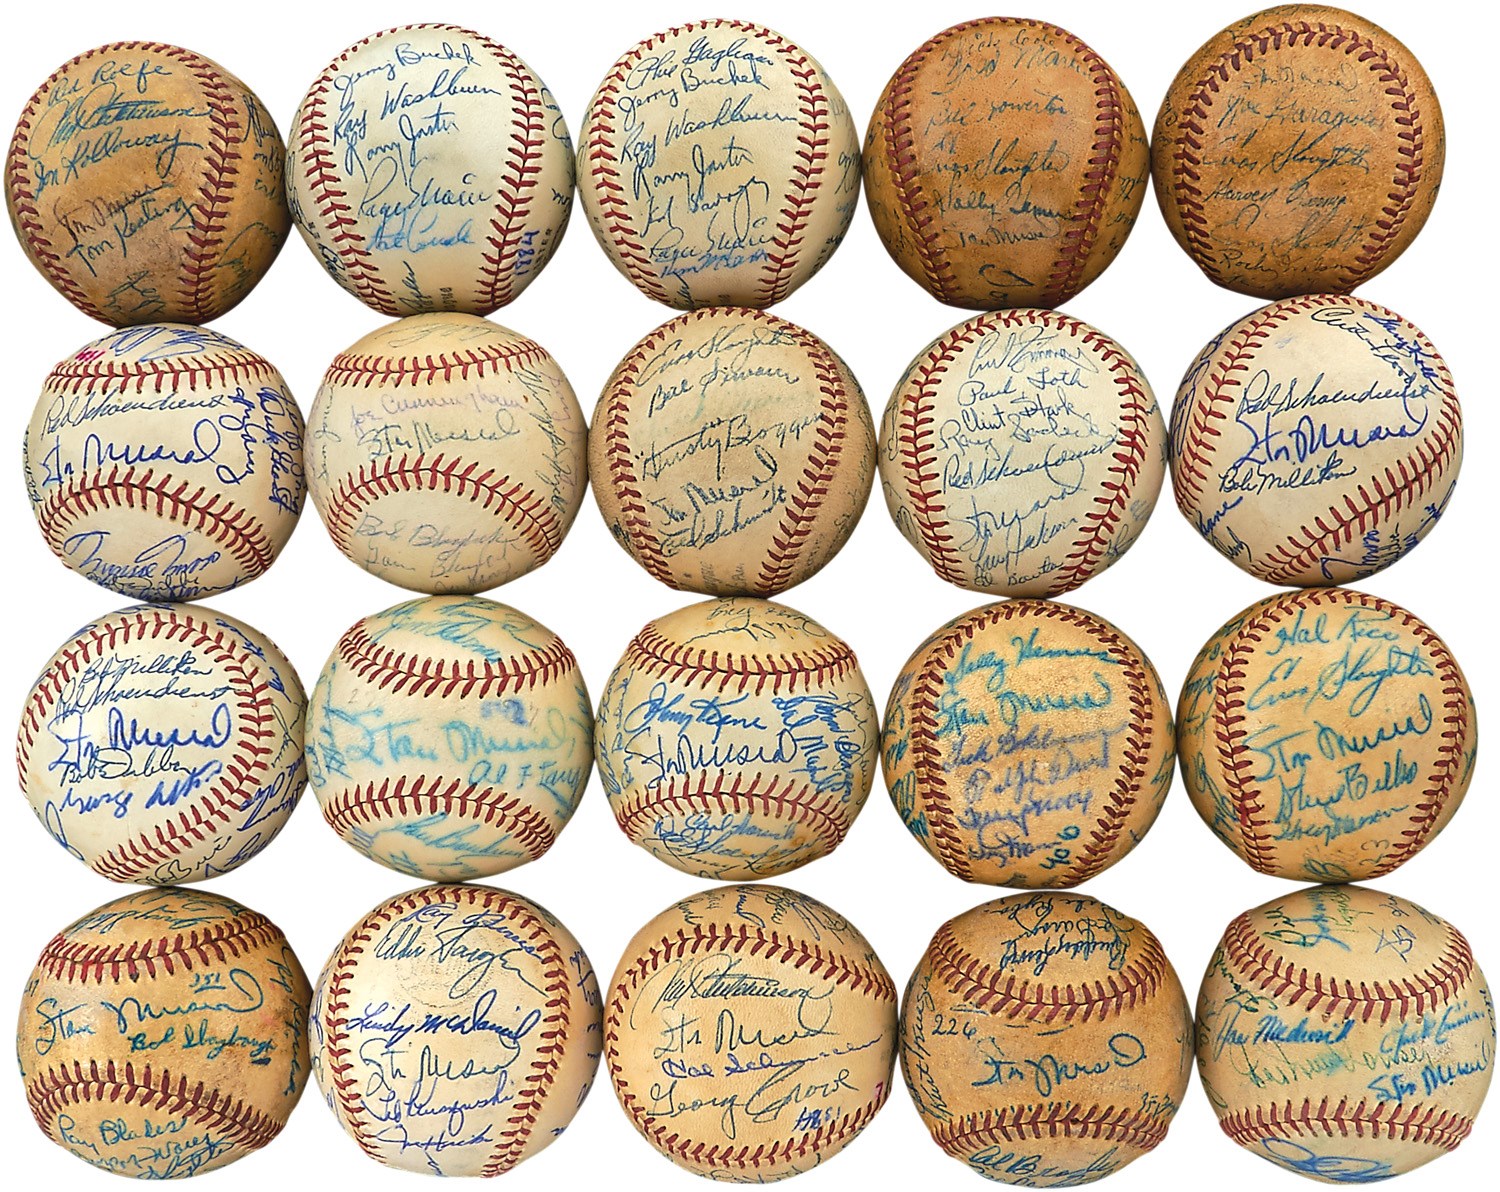 1940s-60s St. Louis Cardinals Team-Signed Baseball Collection (45)